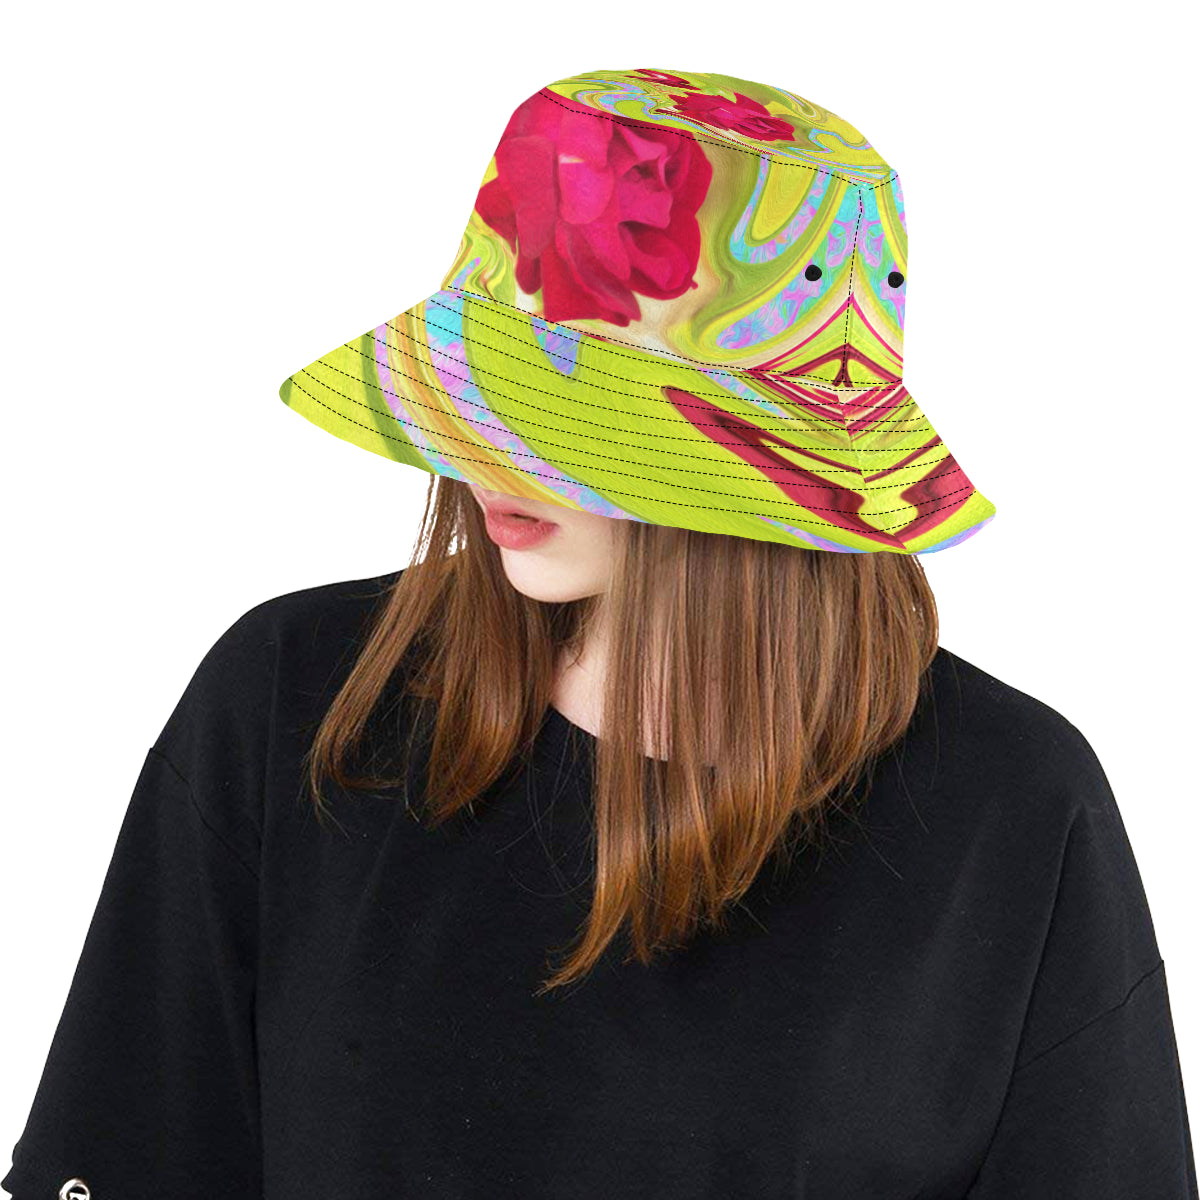 Bucket Hats, Painted Red Rose on Yellow and Blue Abstract